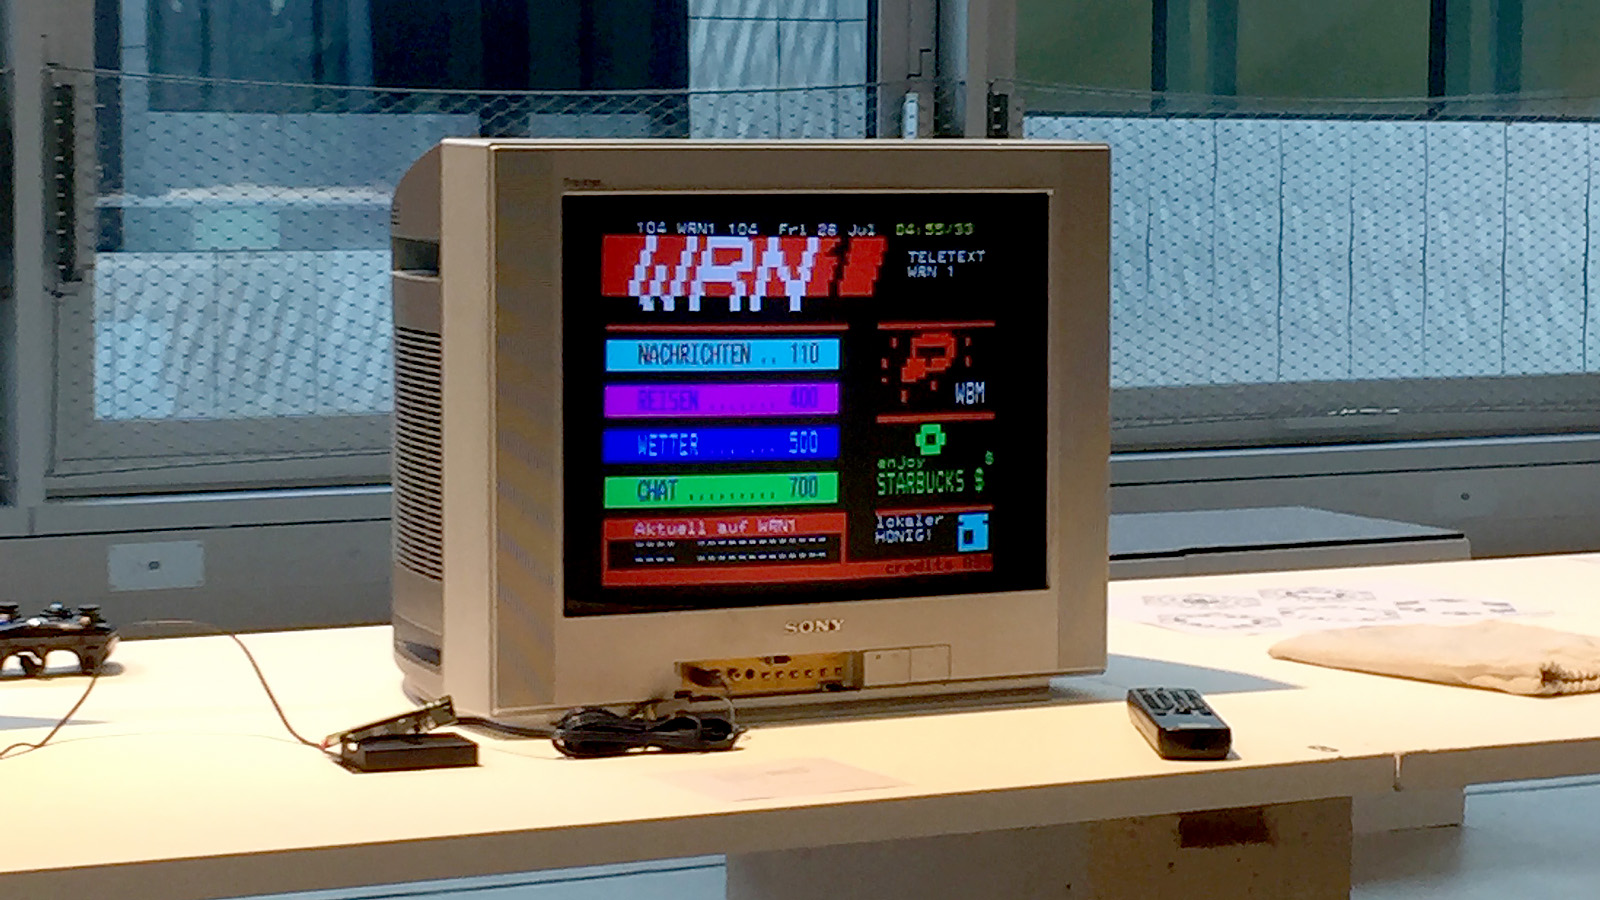 A CRT TV showing the landing page of Teletext WRN1